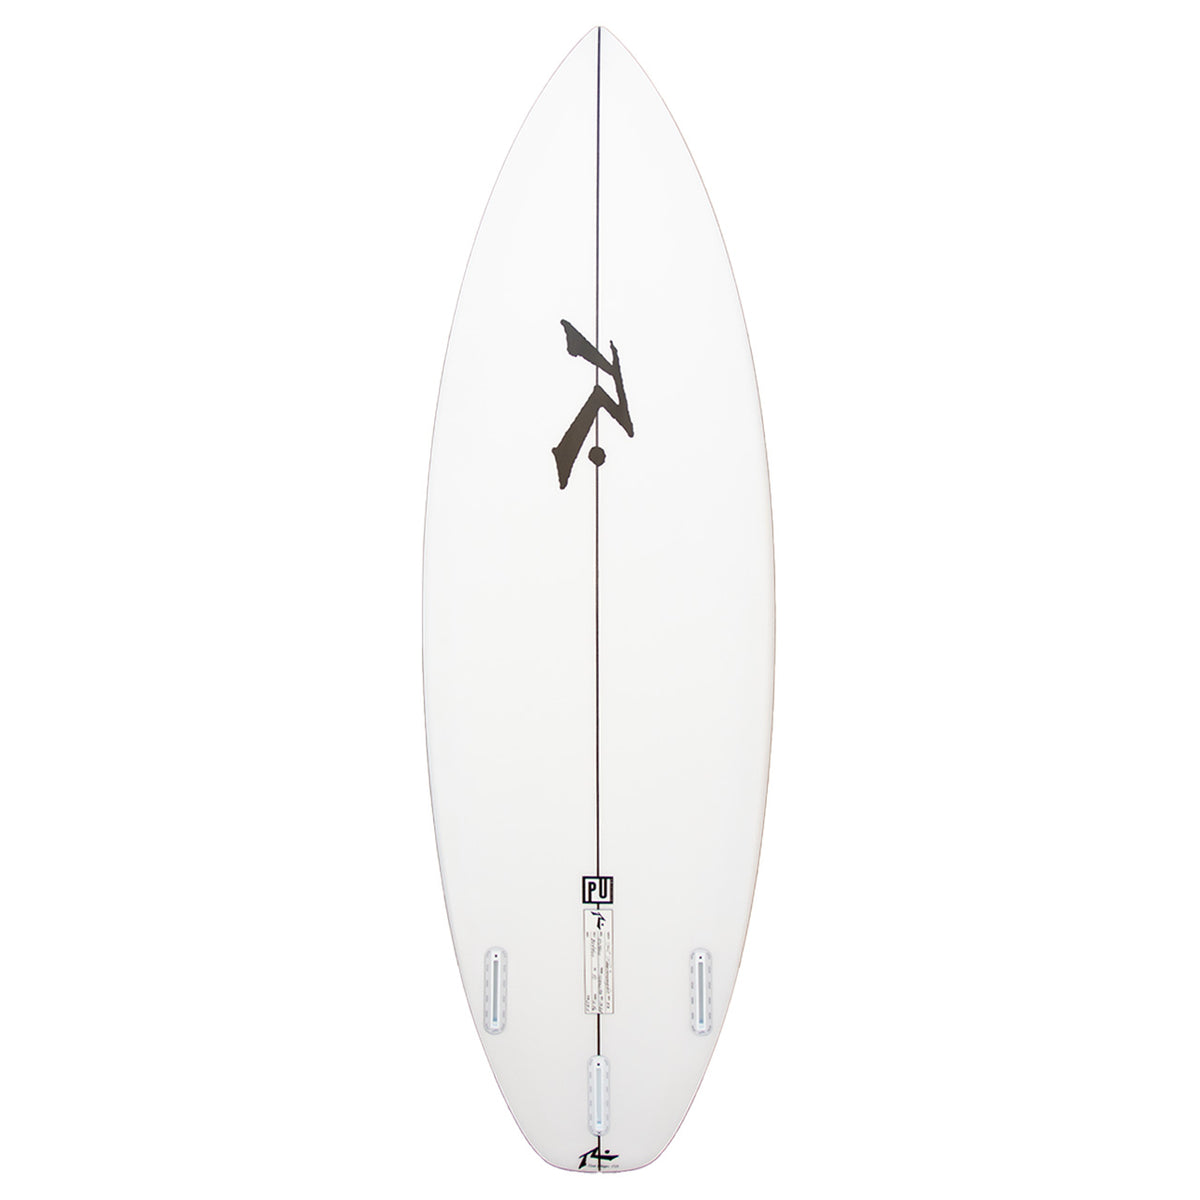 SD - High Performance Shortboard - Rusty Surfboards - Bottom View